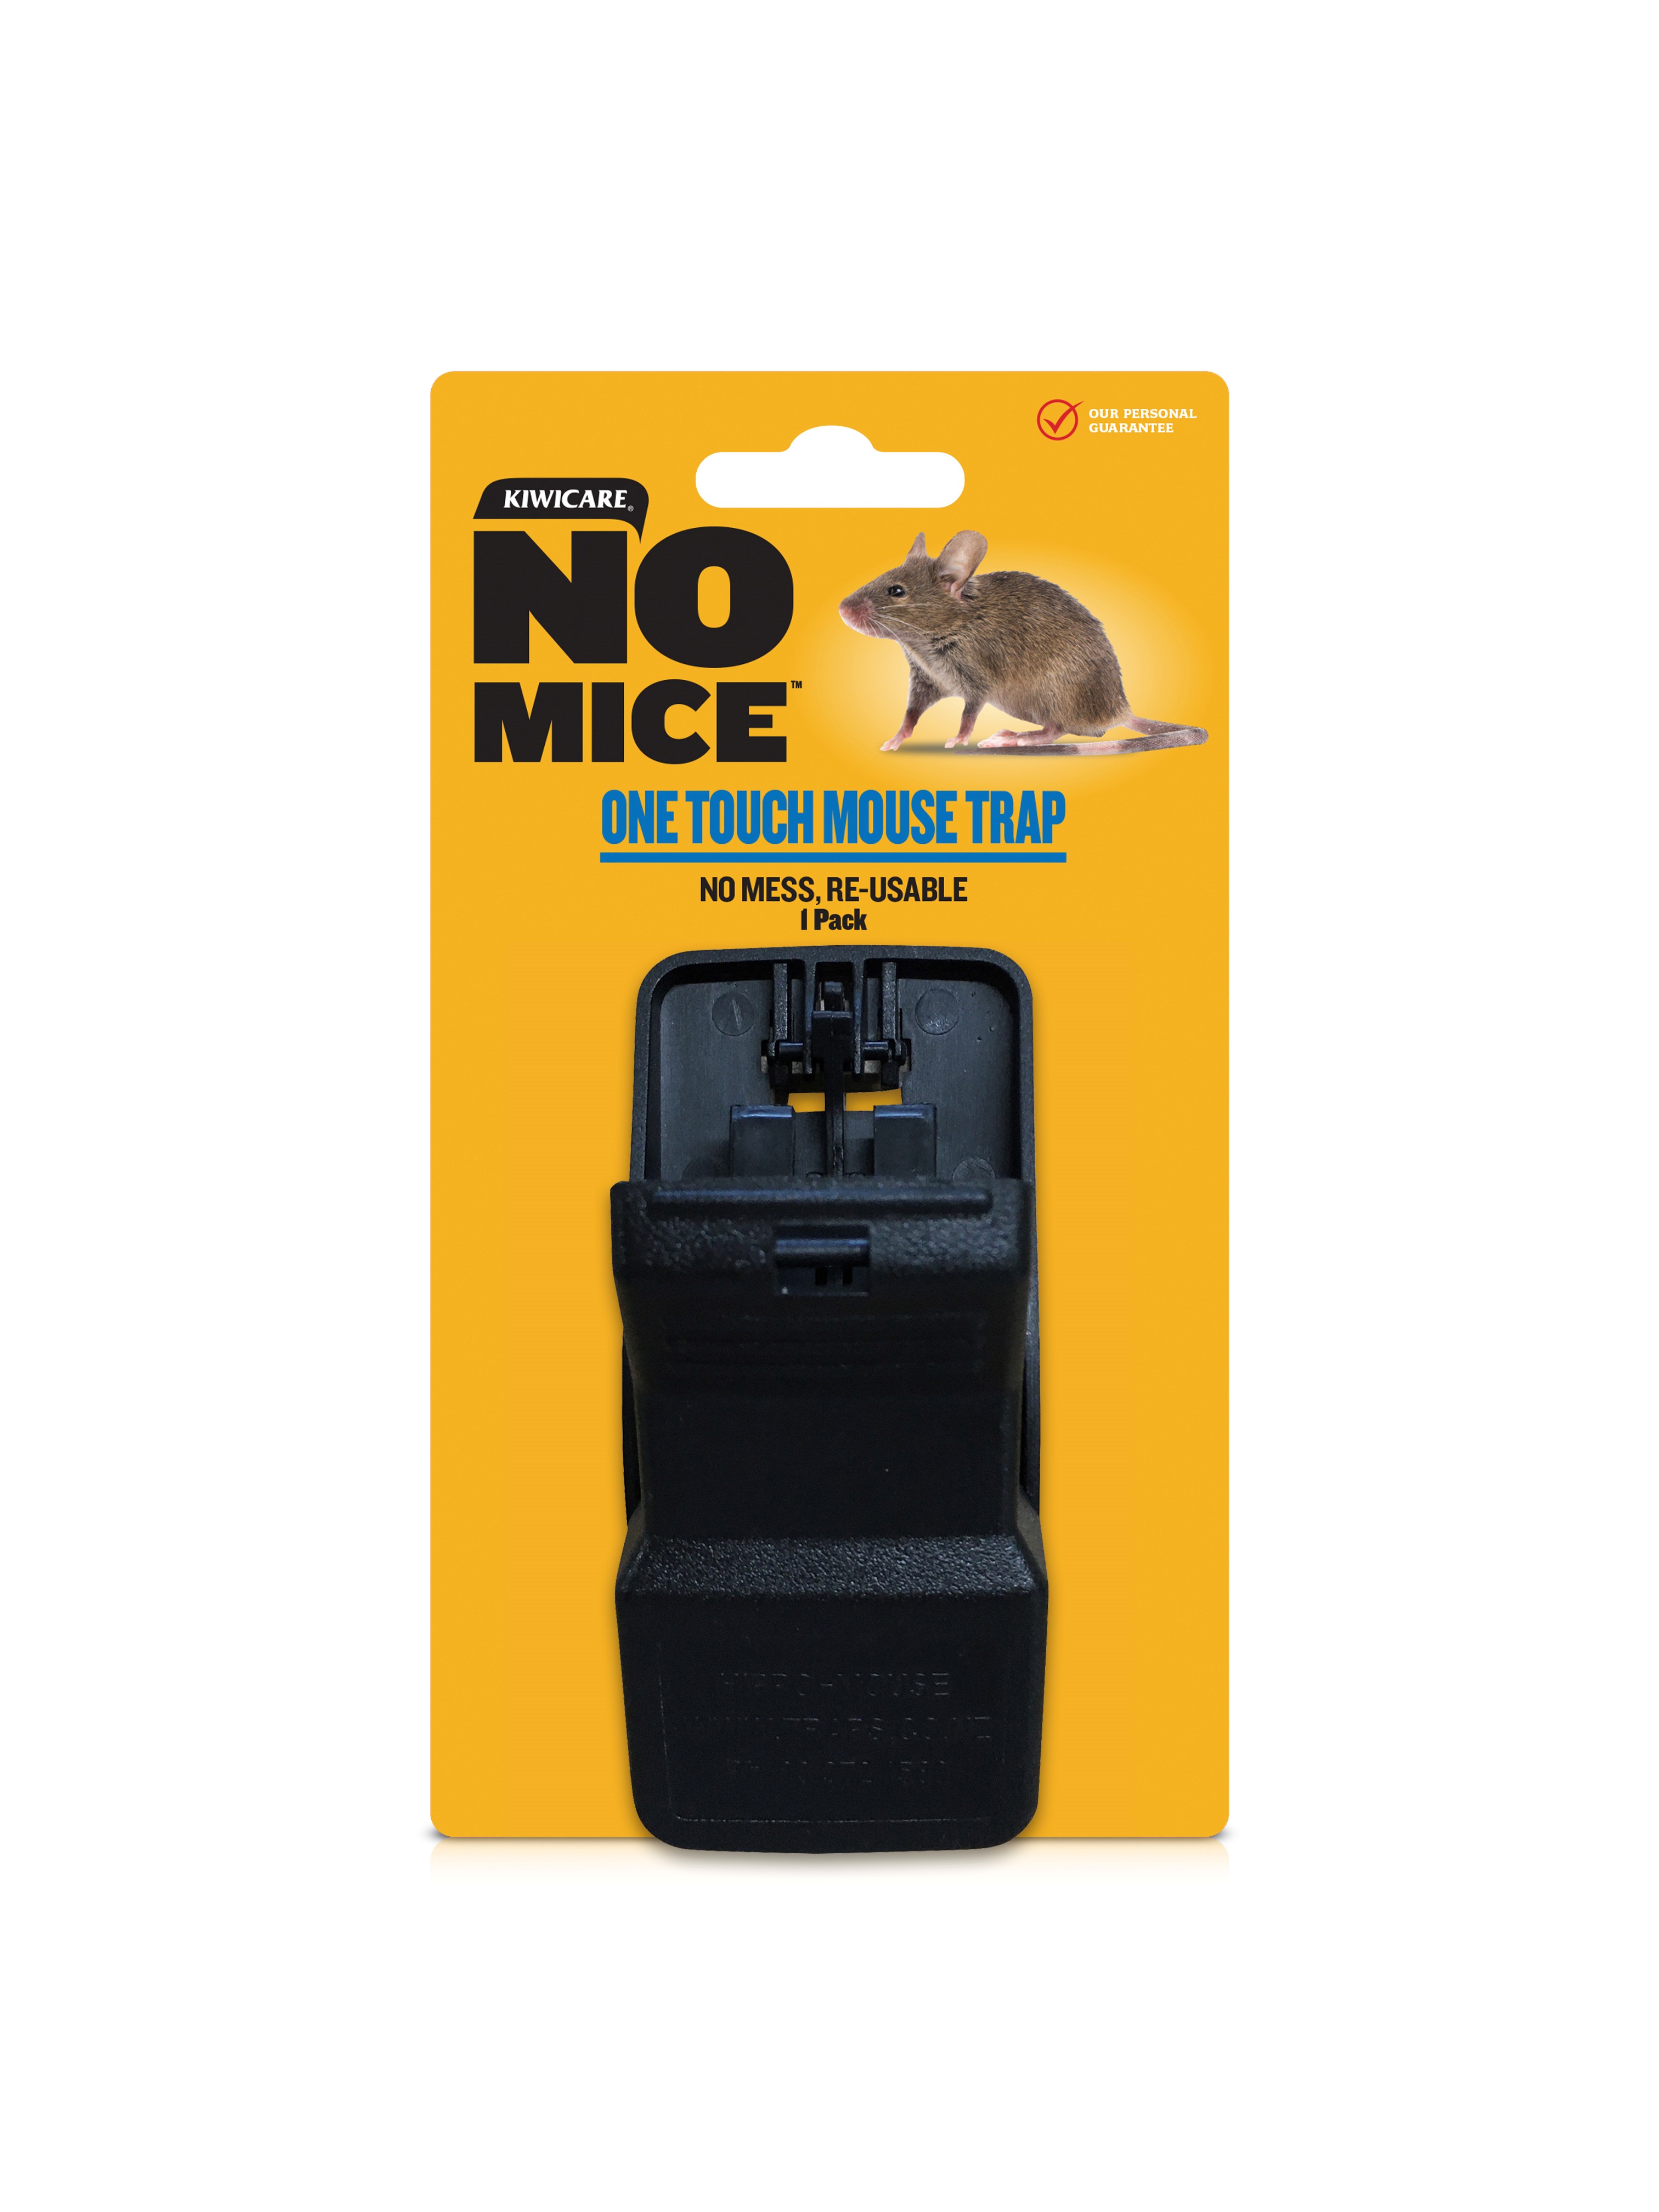 NO Mice One Touch Mouse Traps, Kiwicare